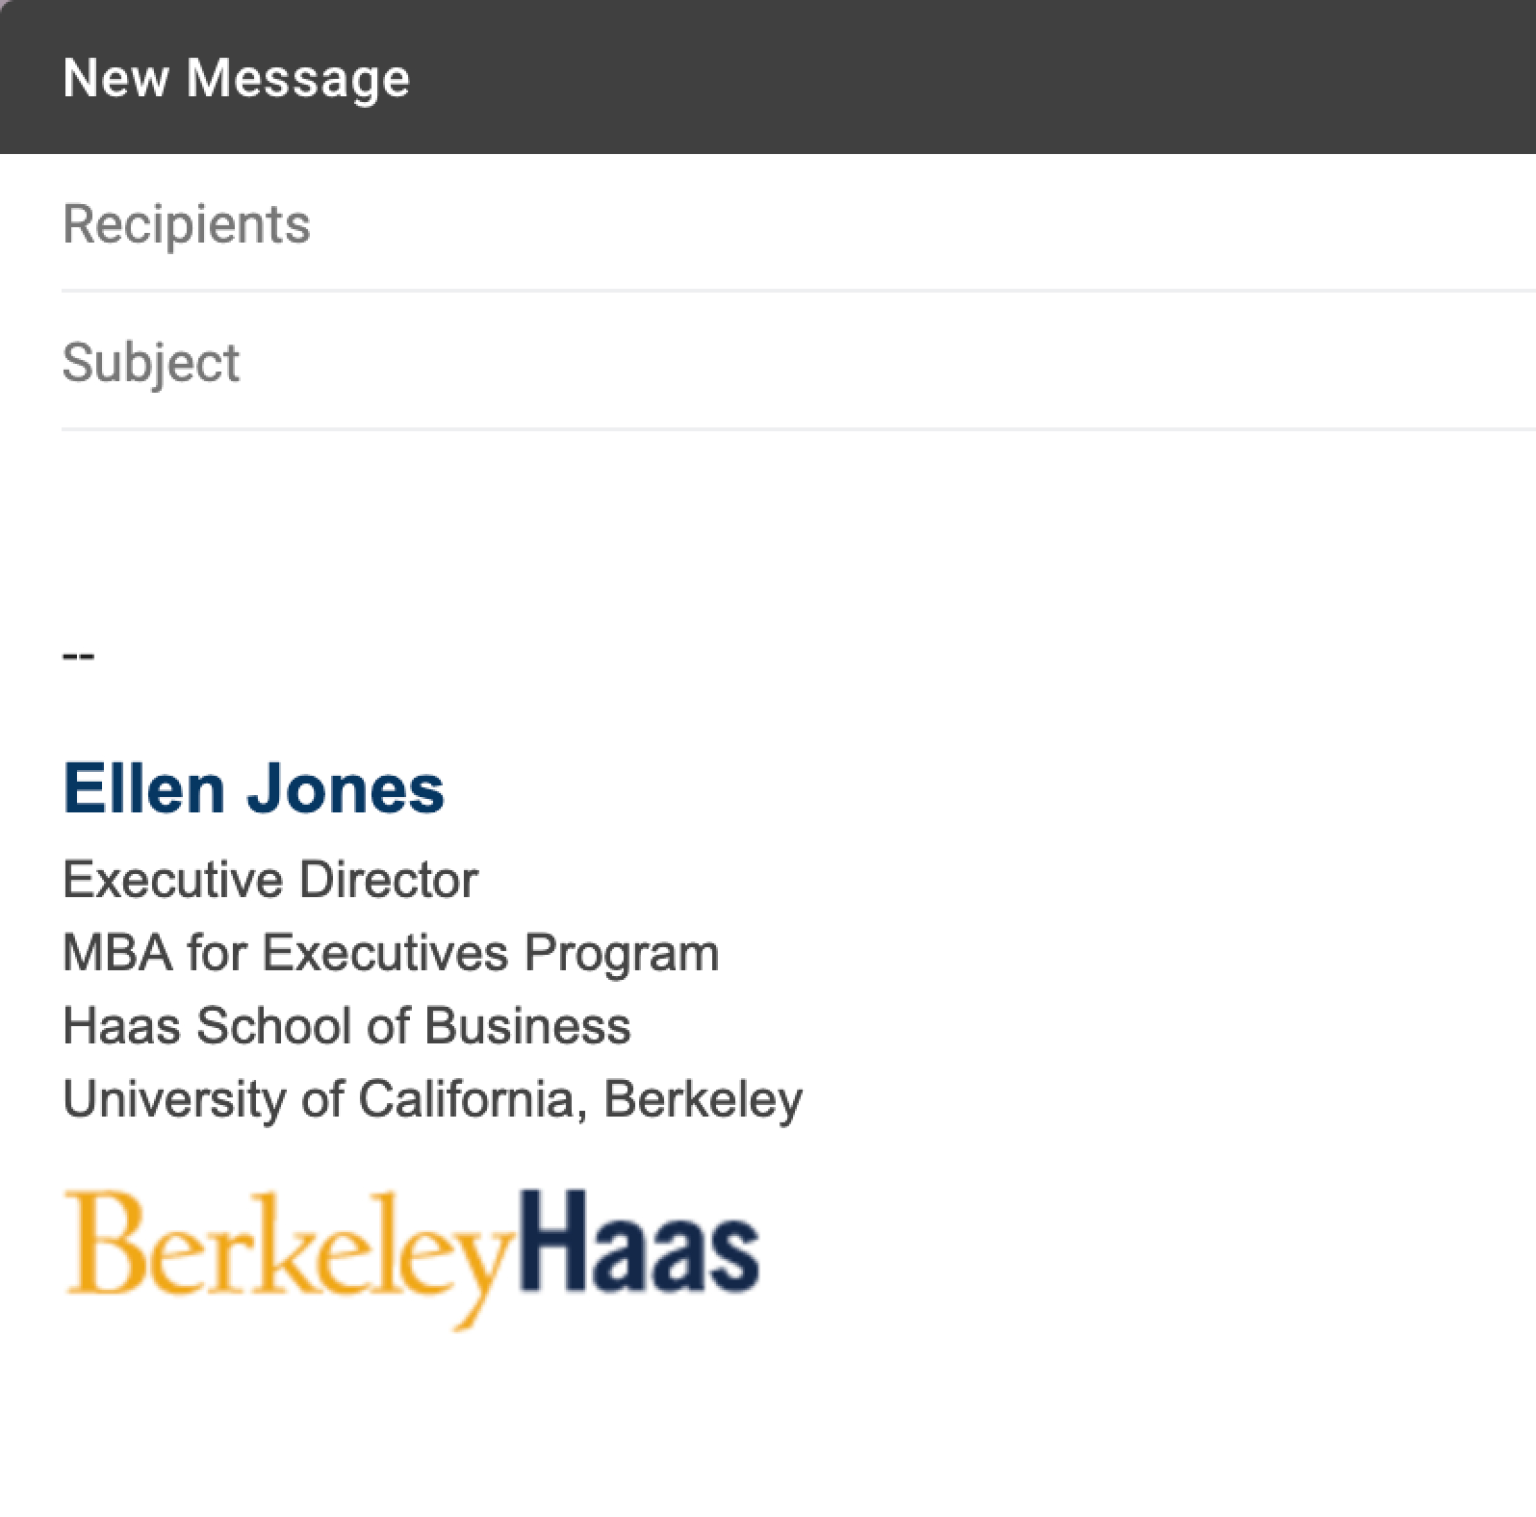 corporate email signatures examples